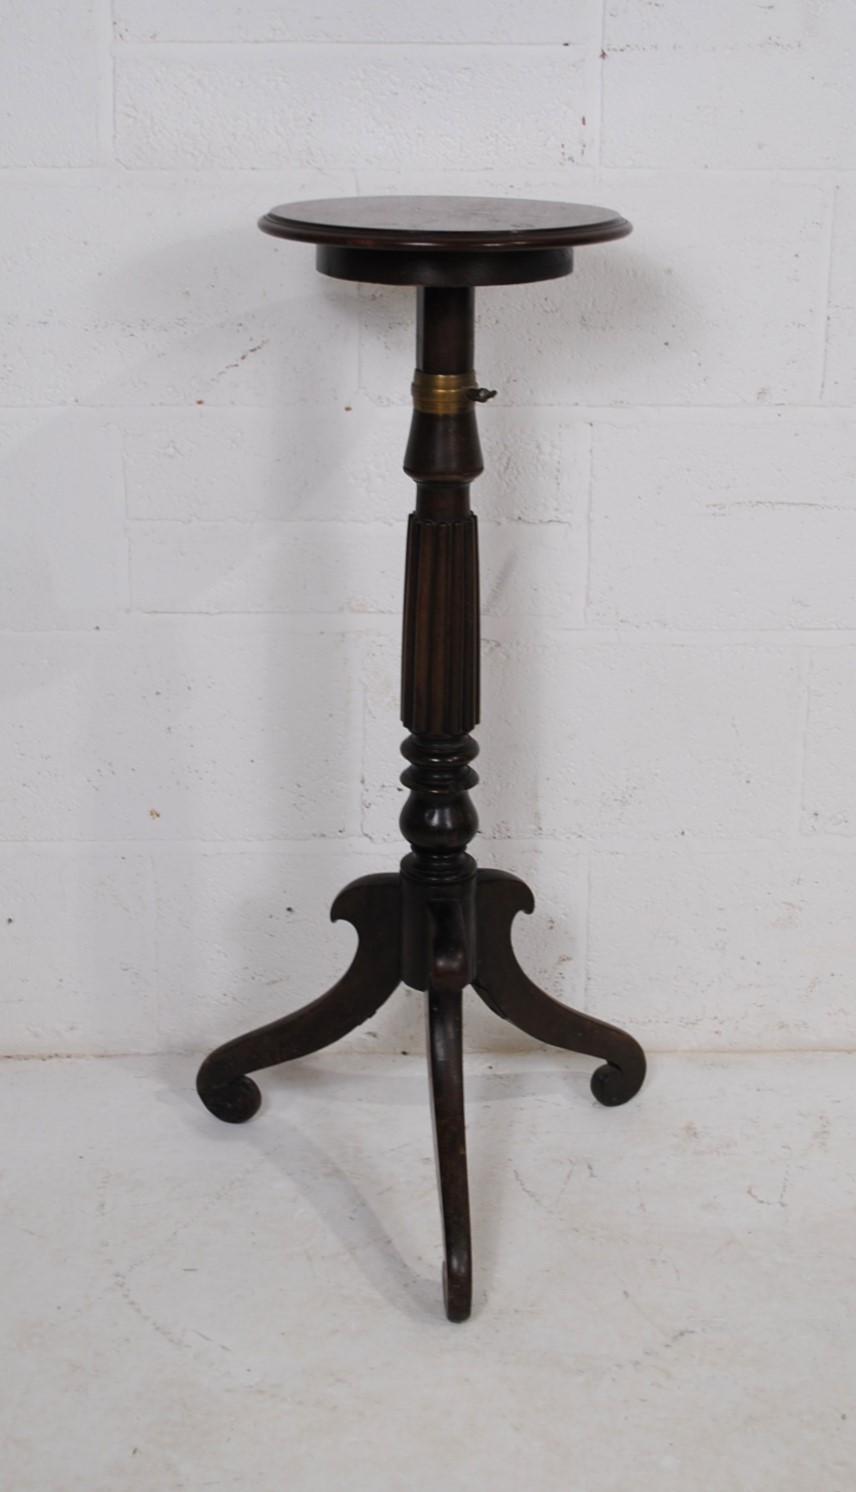 An antique mahogany adjustable plant stand